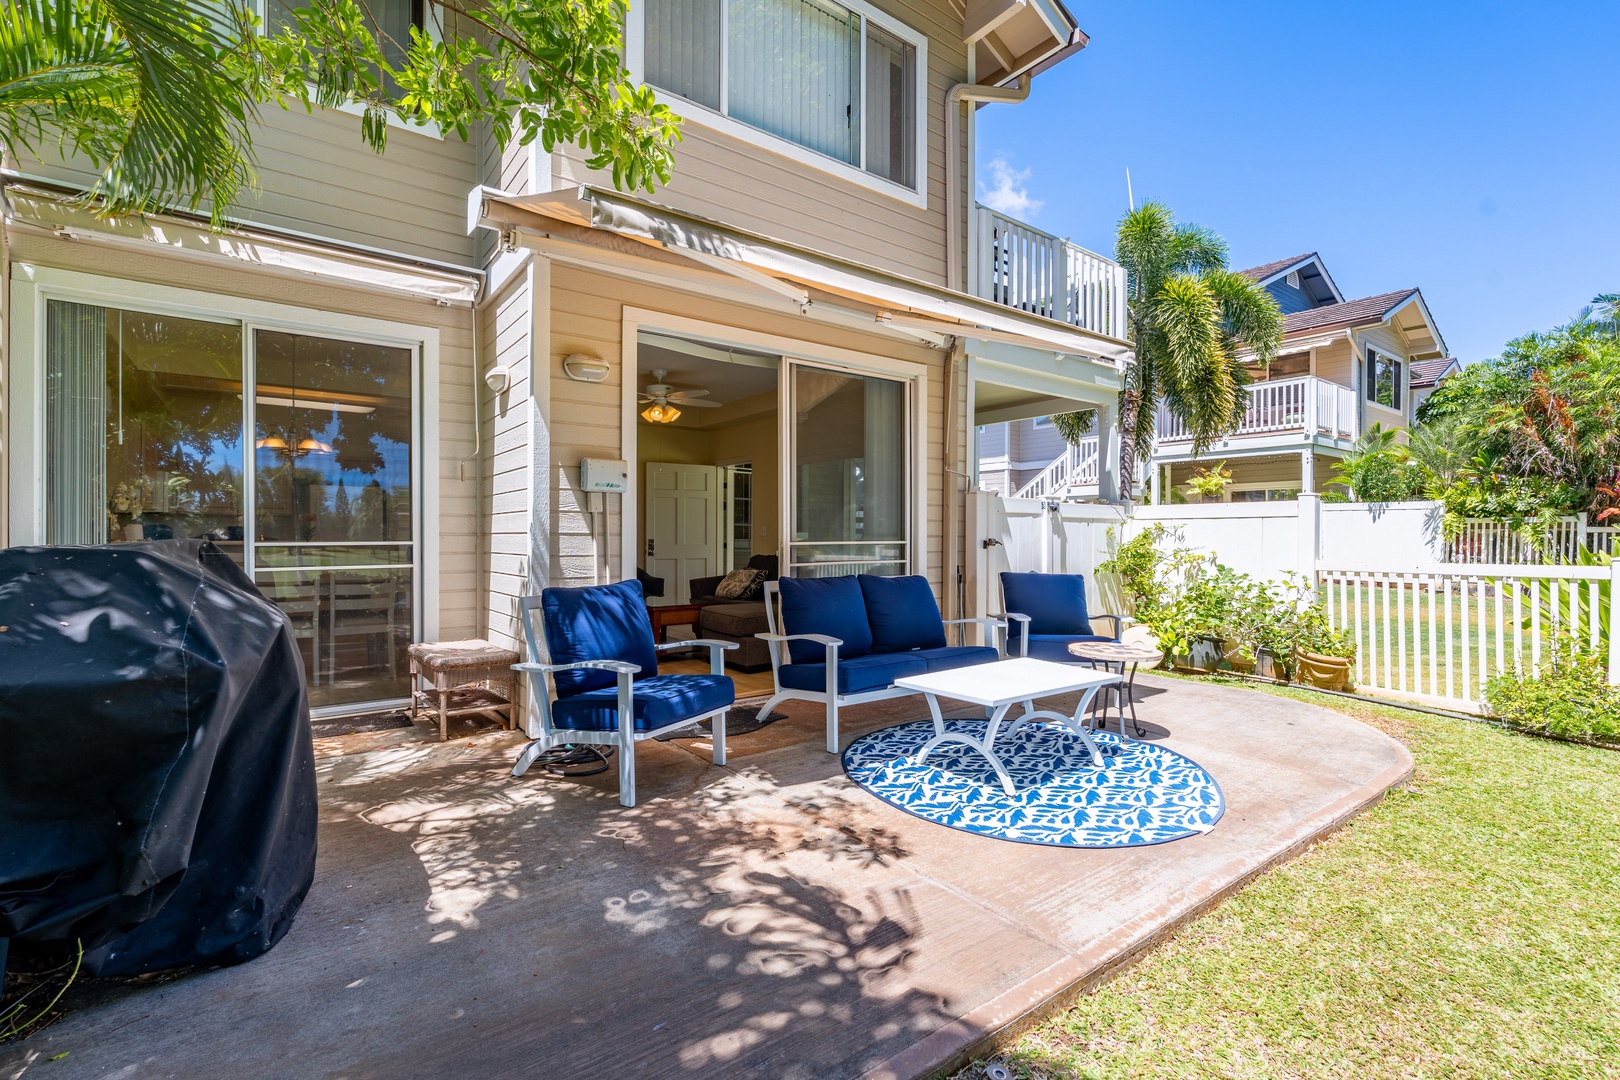 Kapolei Vacation Rentals, Fairways at Ko Olina 18C - Plenty of room for everyone and a BBQ grill for your next feast.